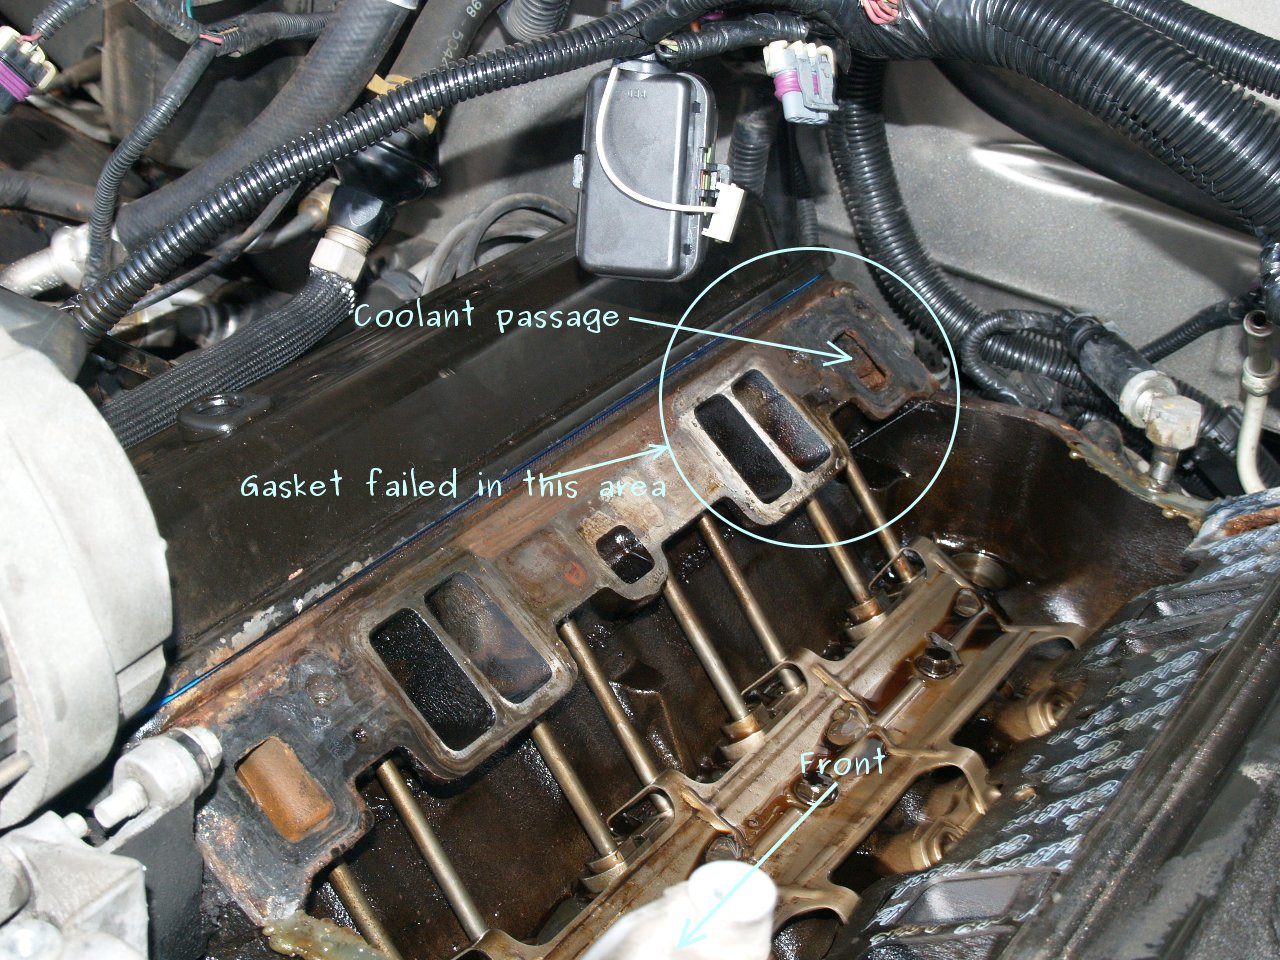 See P0408 in engine